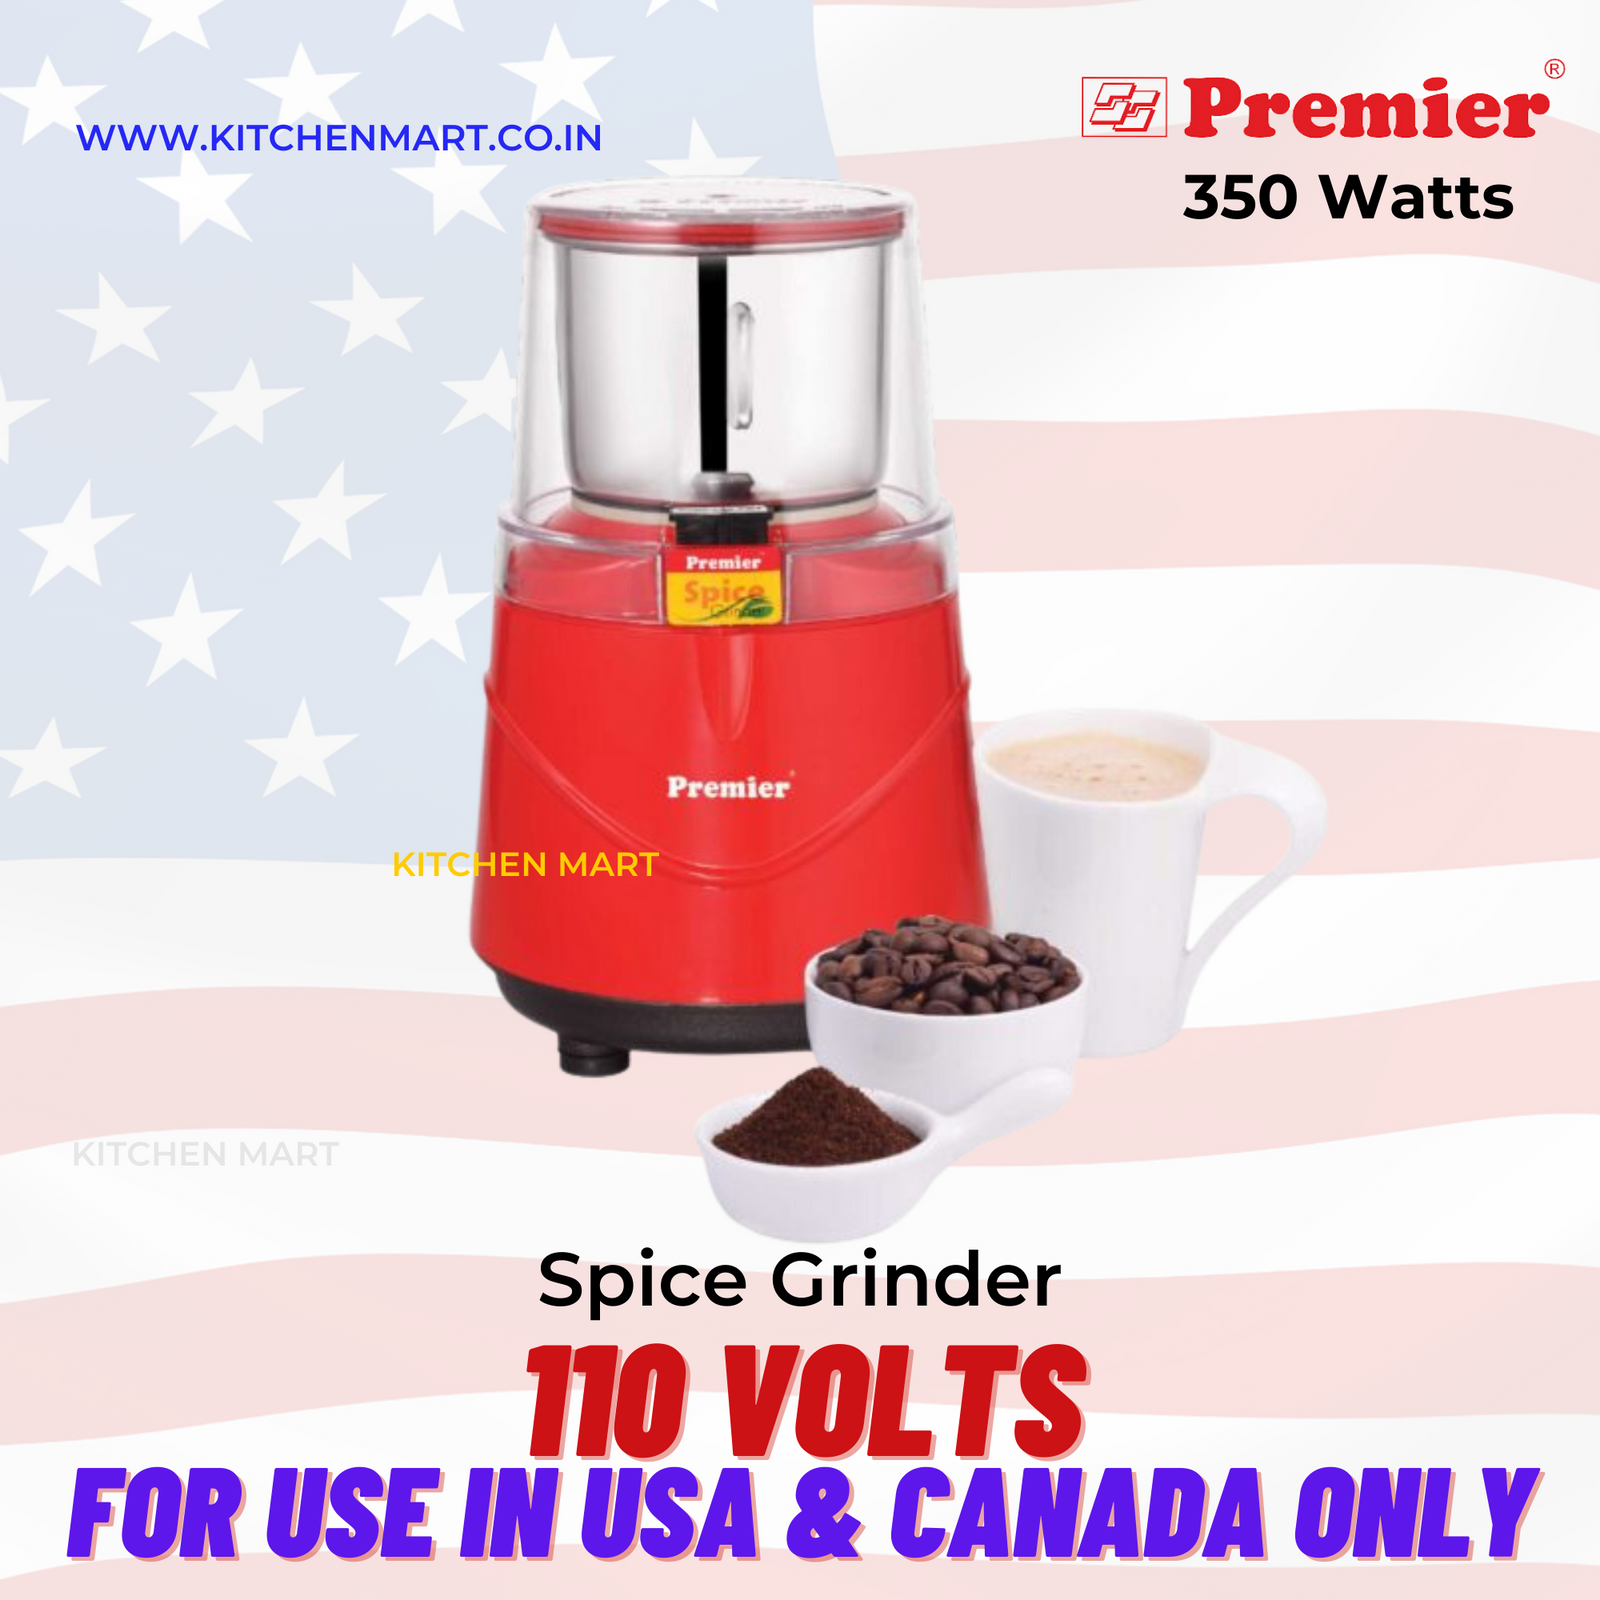 Premier Spice Grinder 🌶️ – Powerful 350W Electric Grinder ⚡ for Coffee Beans ☕, Spices 🍛, and More – Stylish Red Finish ❤️ with Clear Lid 🔍 - 110 volts for USA and Canada only